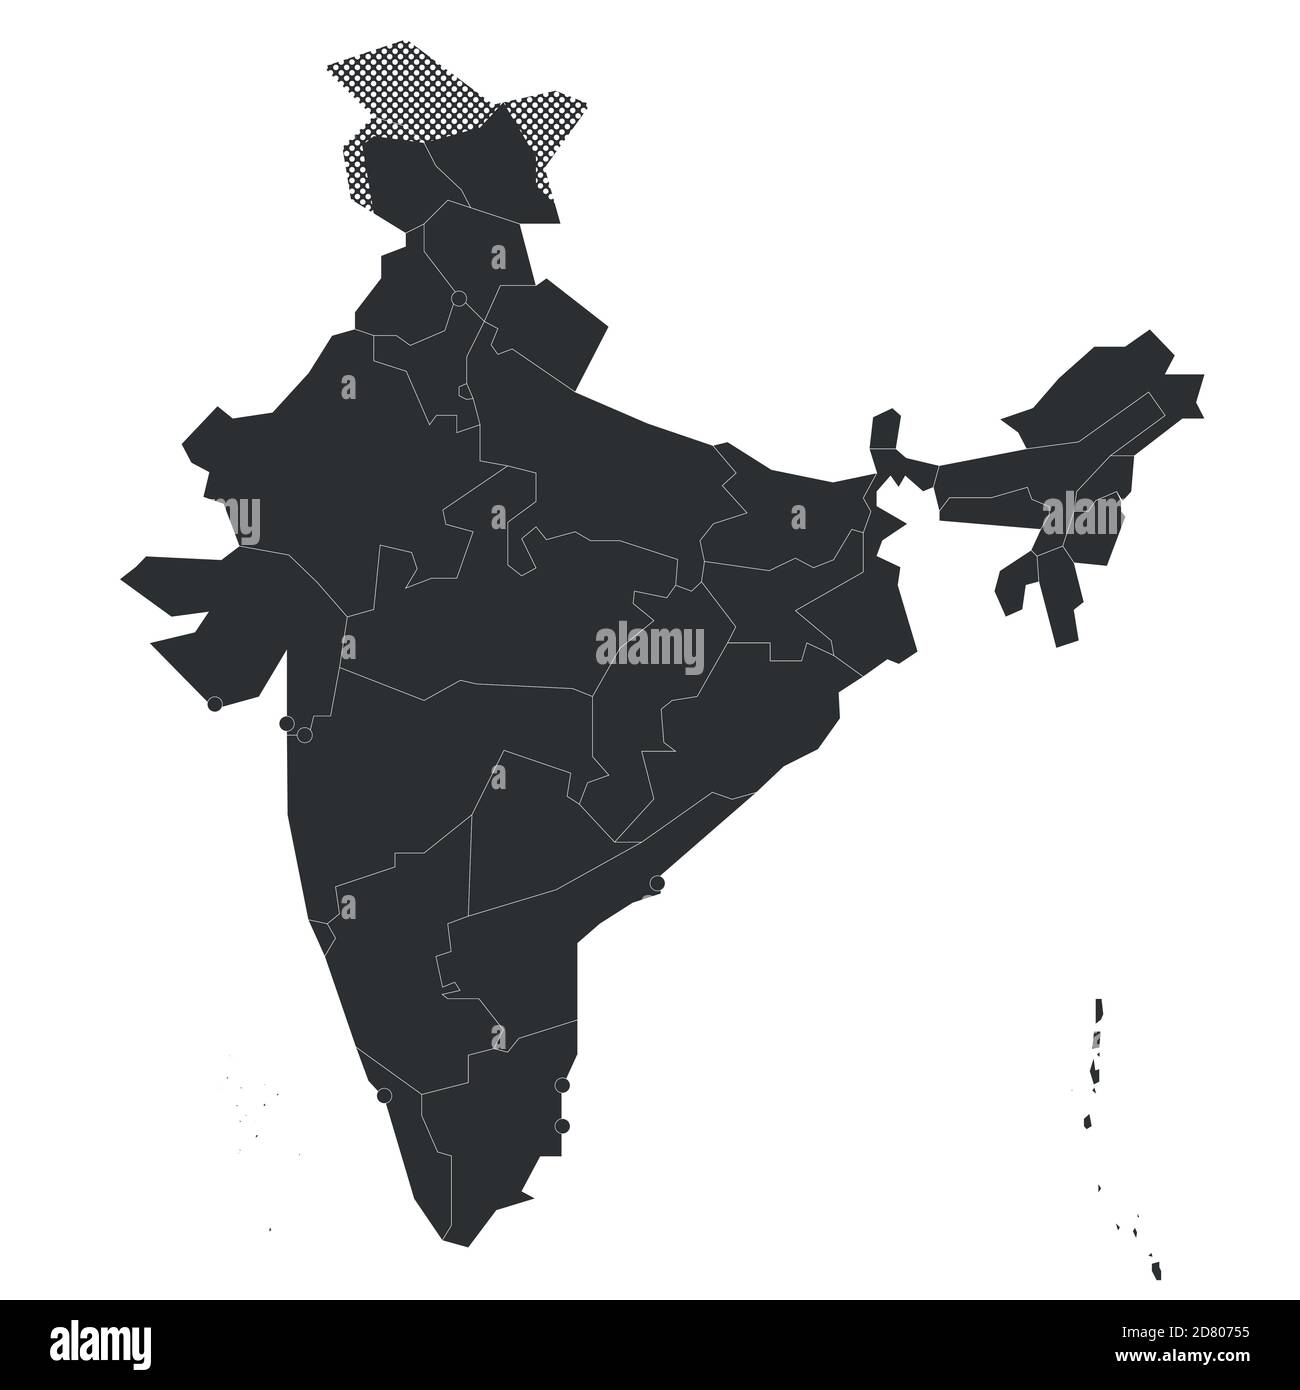 Blank political map of India. Administrative divisions - states and union territories. Simple black vector map. Stock Vector